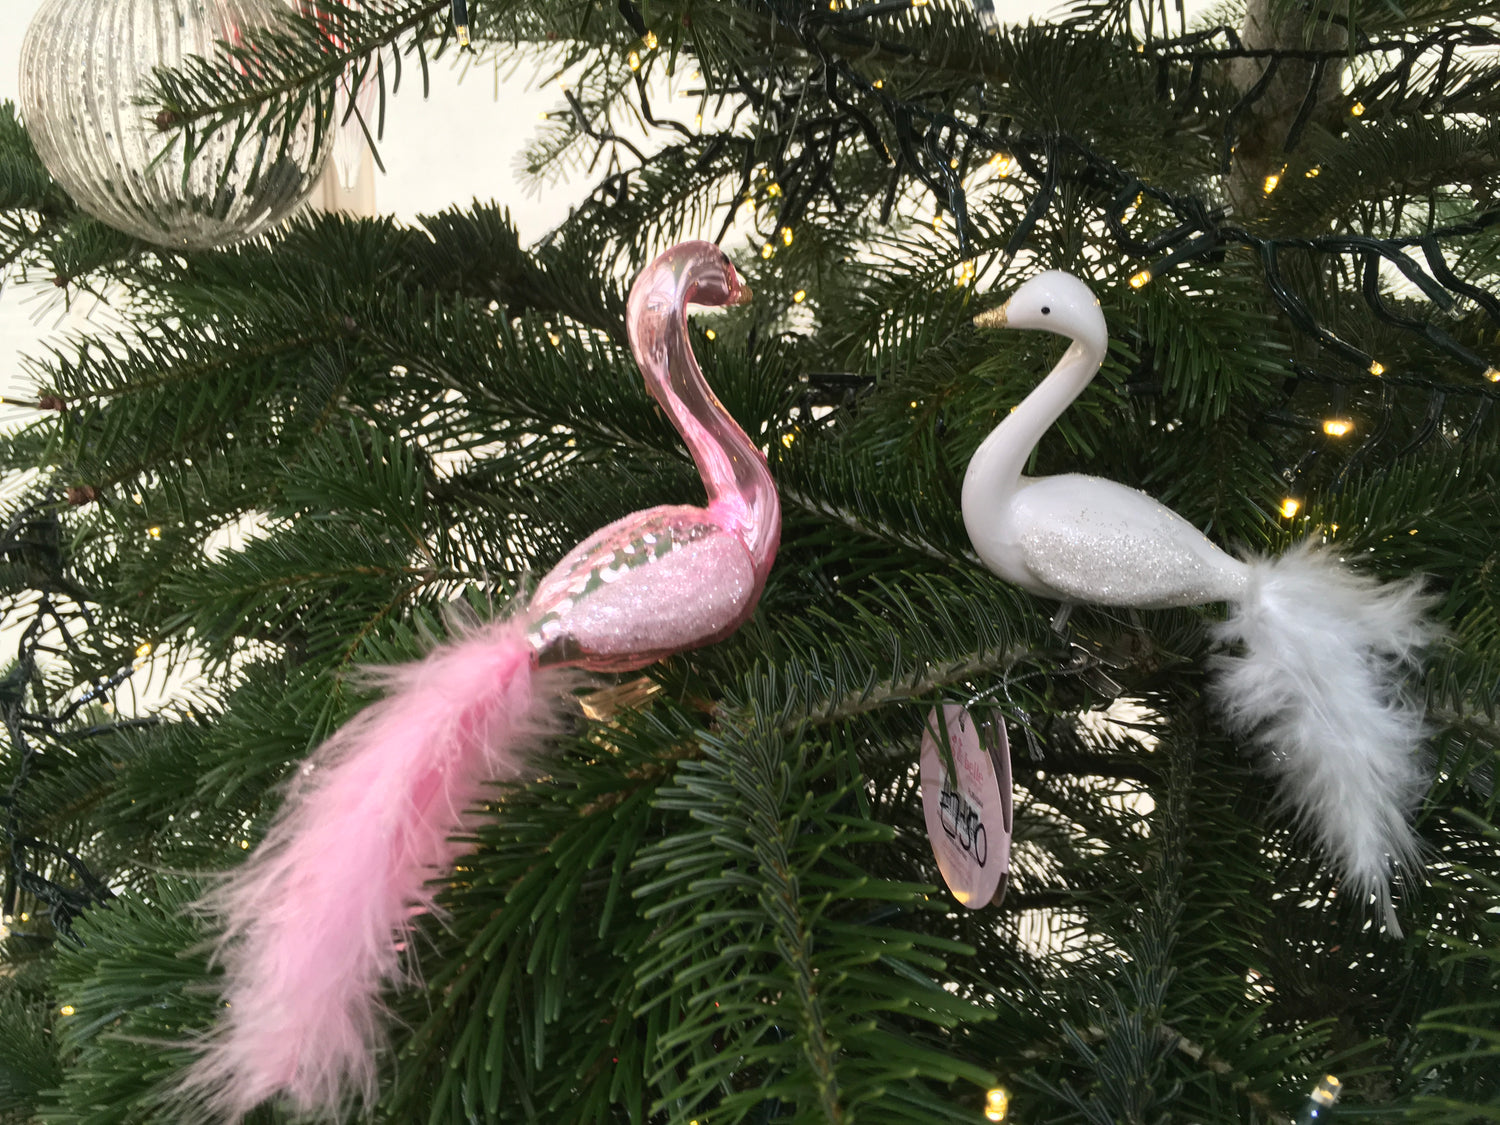 Glass Pink flamingo with gold beak, and glittery wings with real tail feathers, this clip bobs around on a tree.